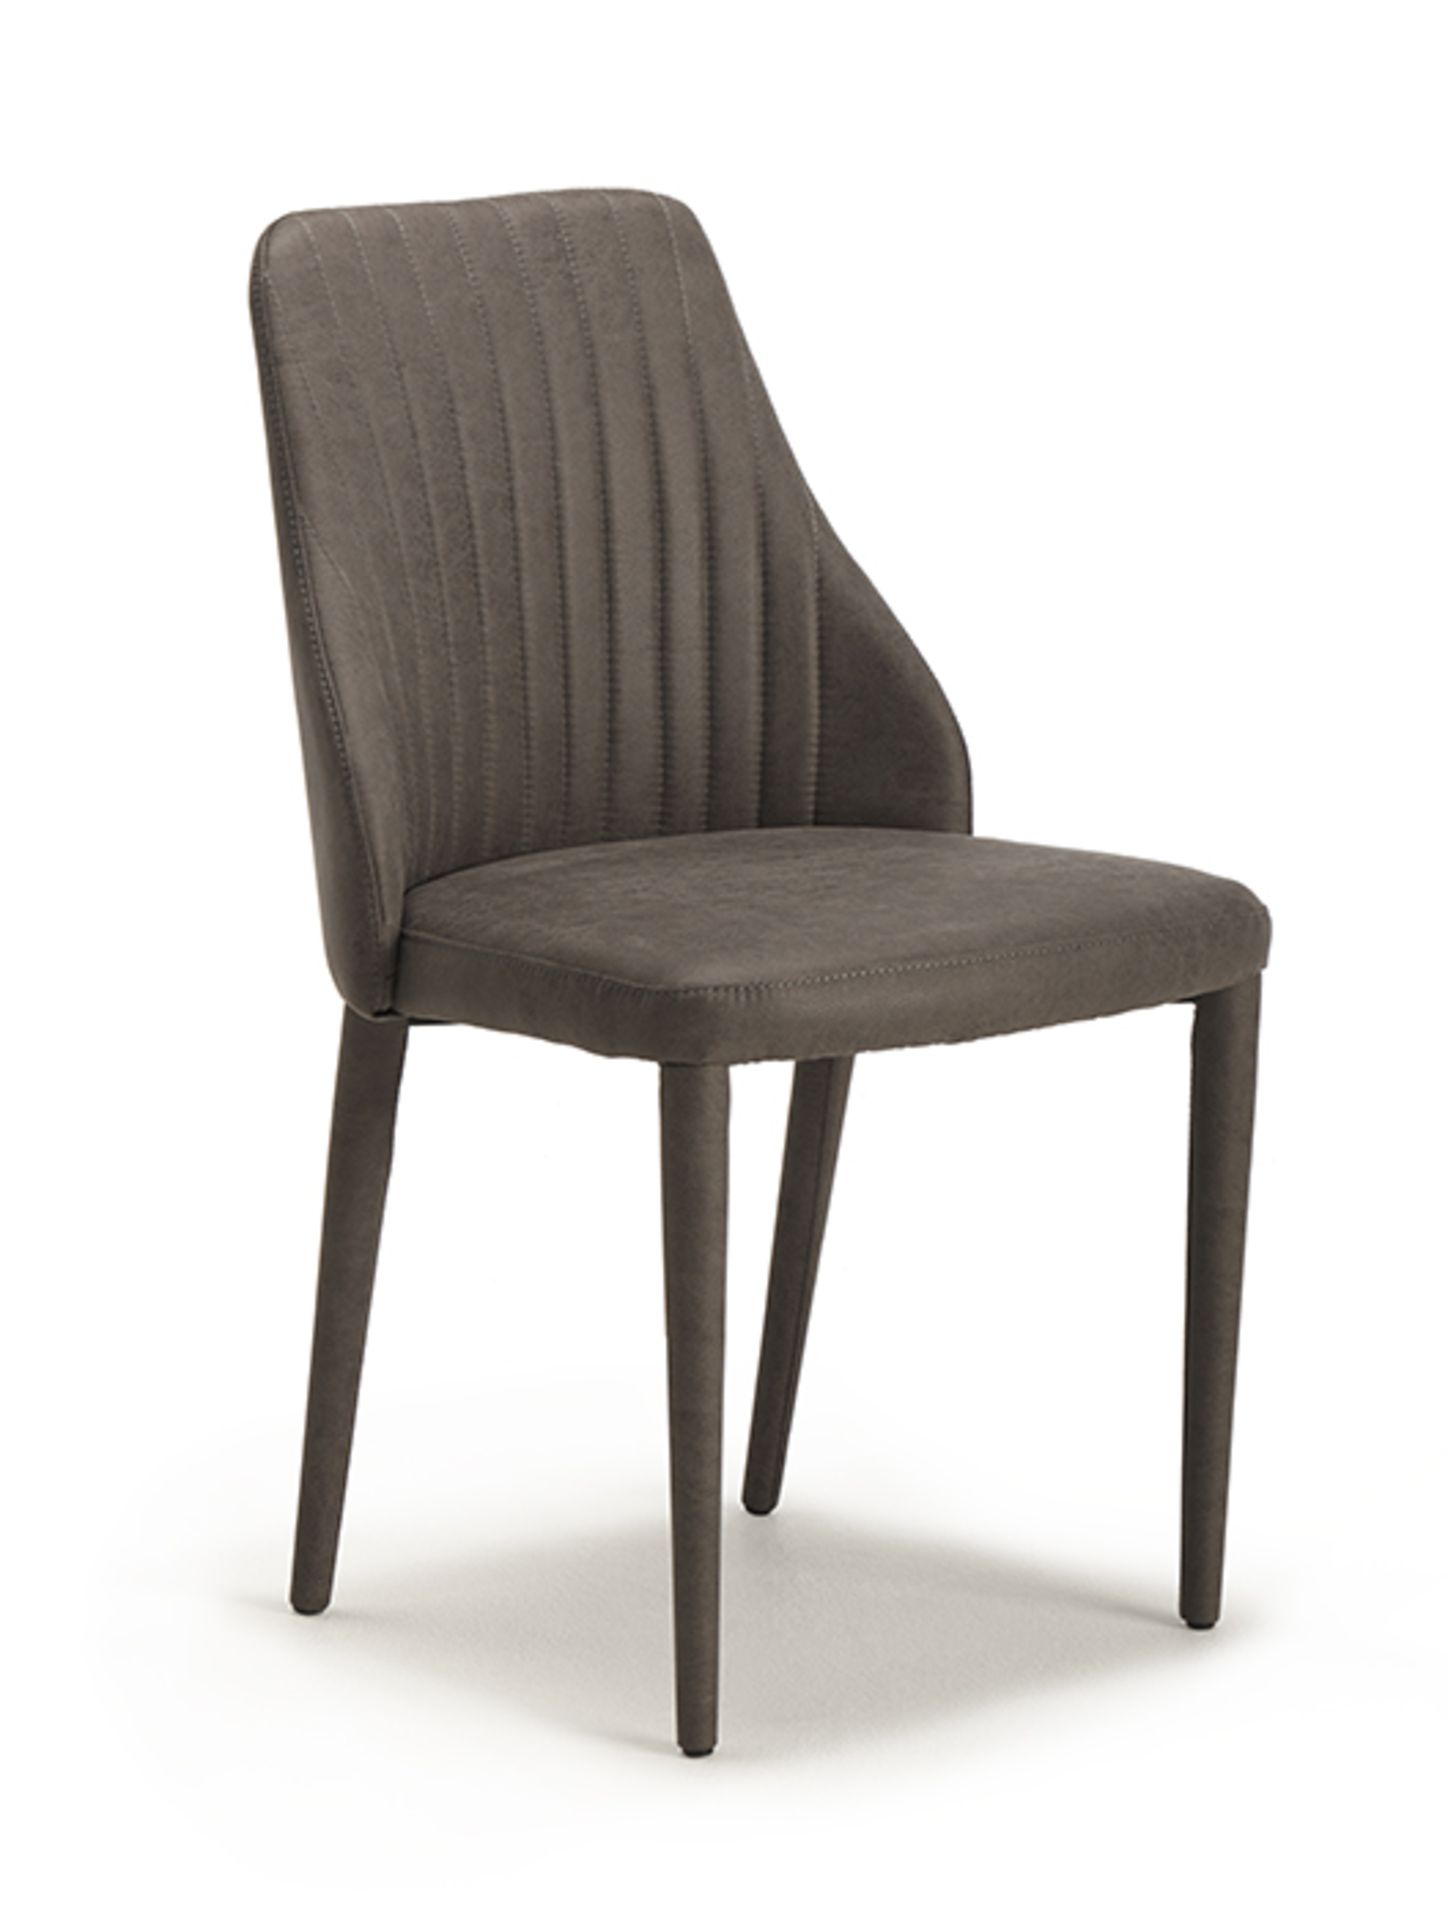 A set of 6 x Lundy Chairs by Kesterport The Lundy Chair is fully upholstered in our popular dark - Image 6 of 6